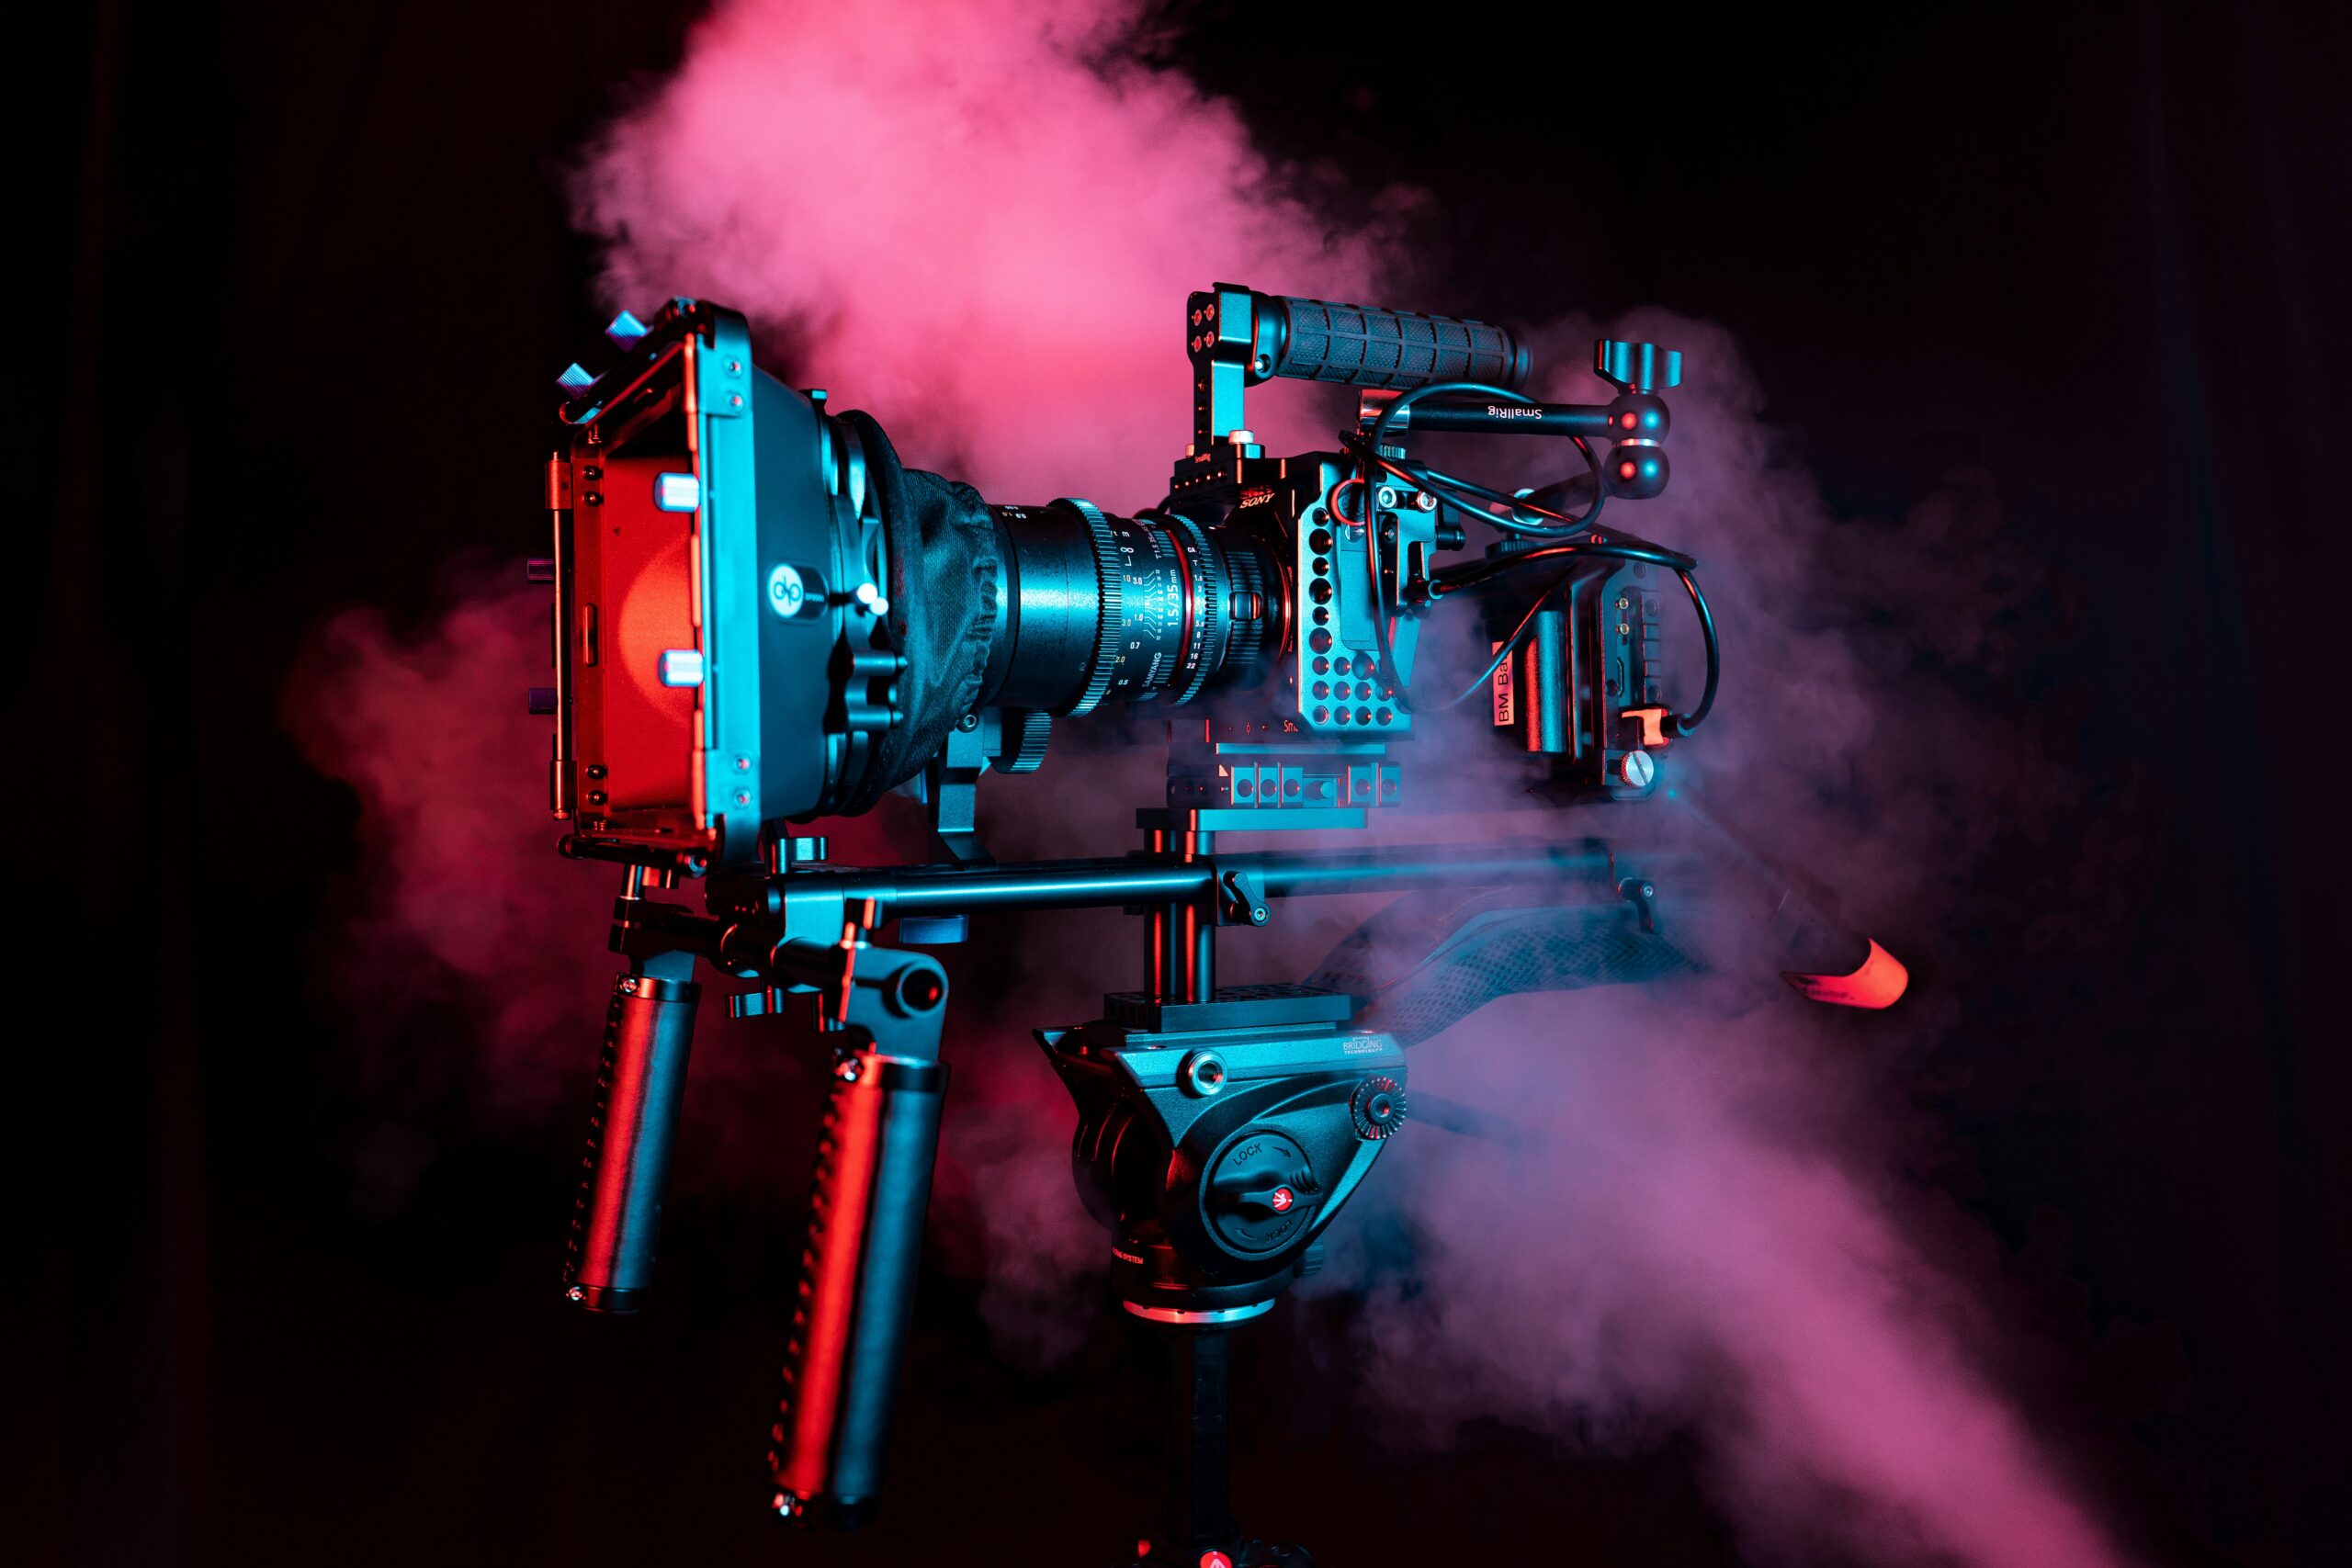 large video camera covered in misty smoke